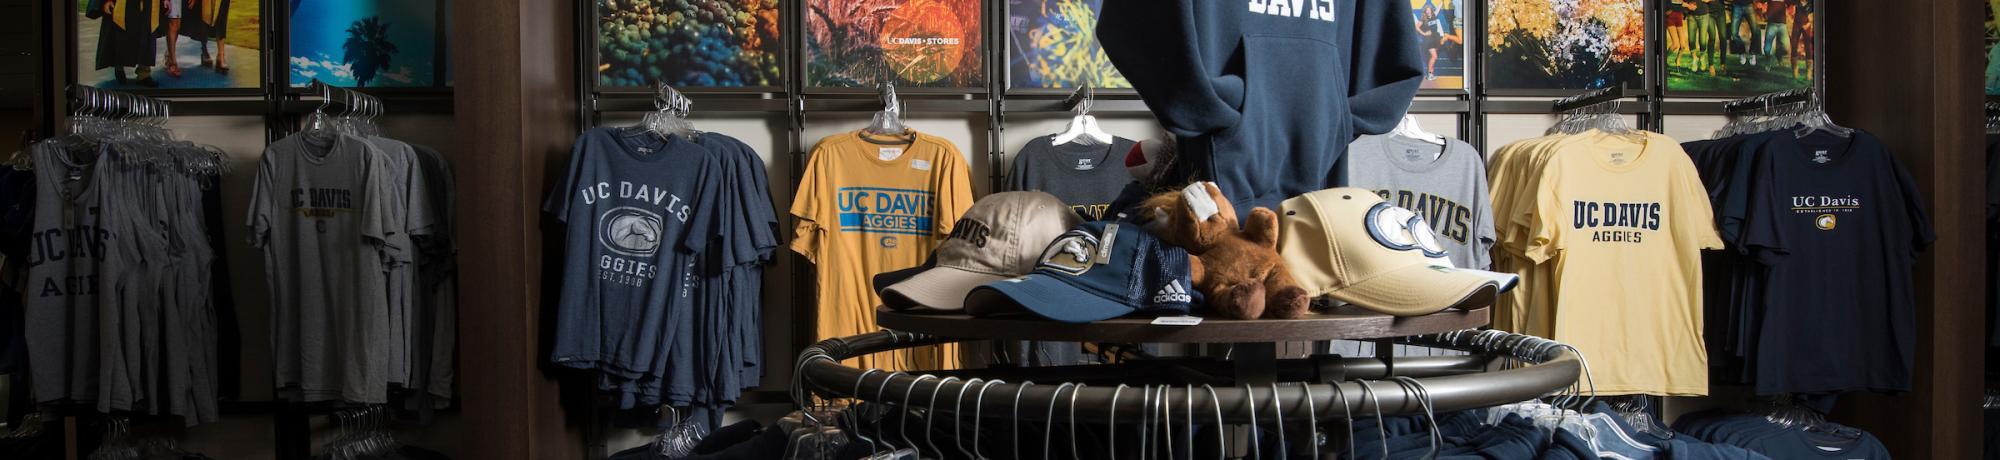 display of ucd branded clothing items